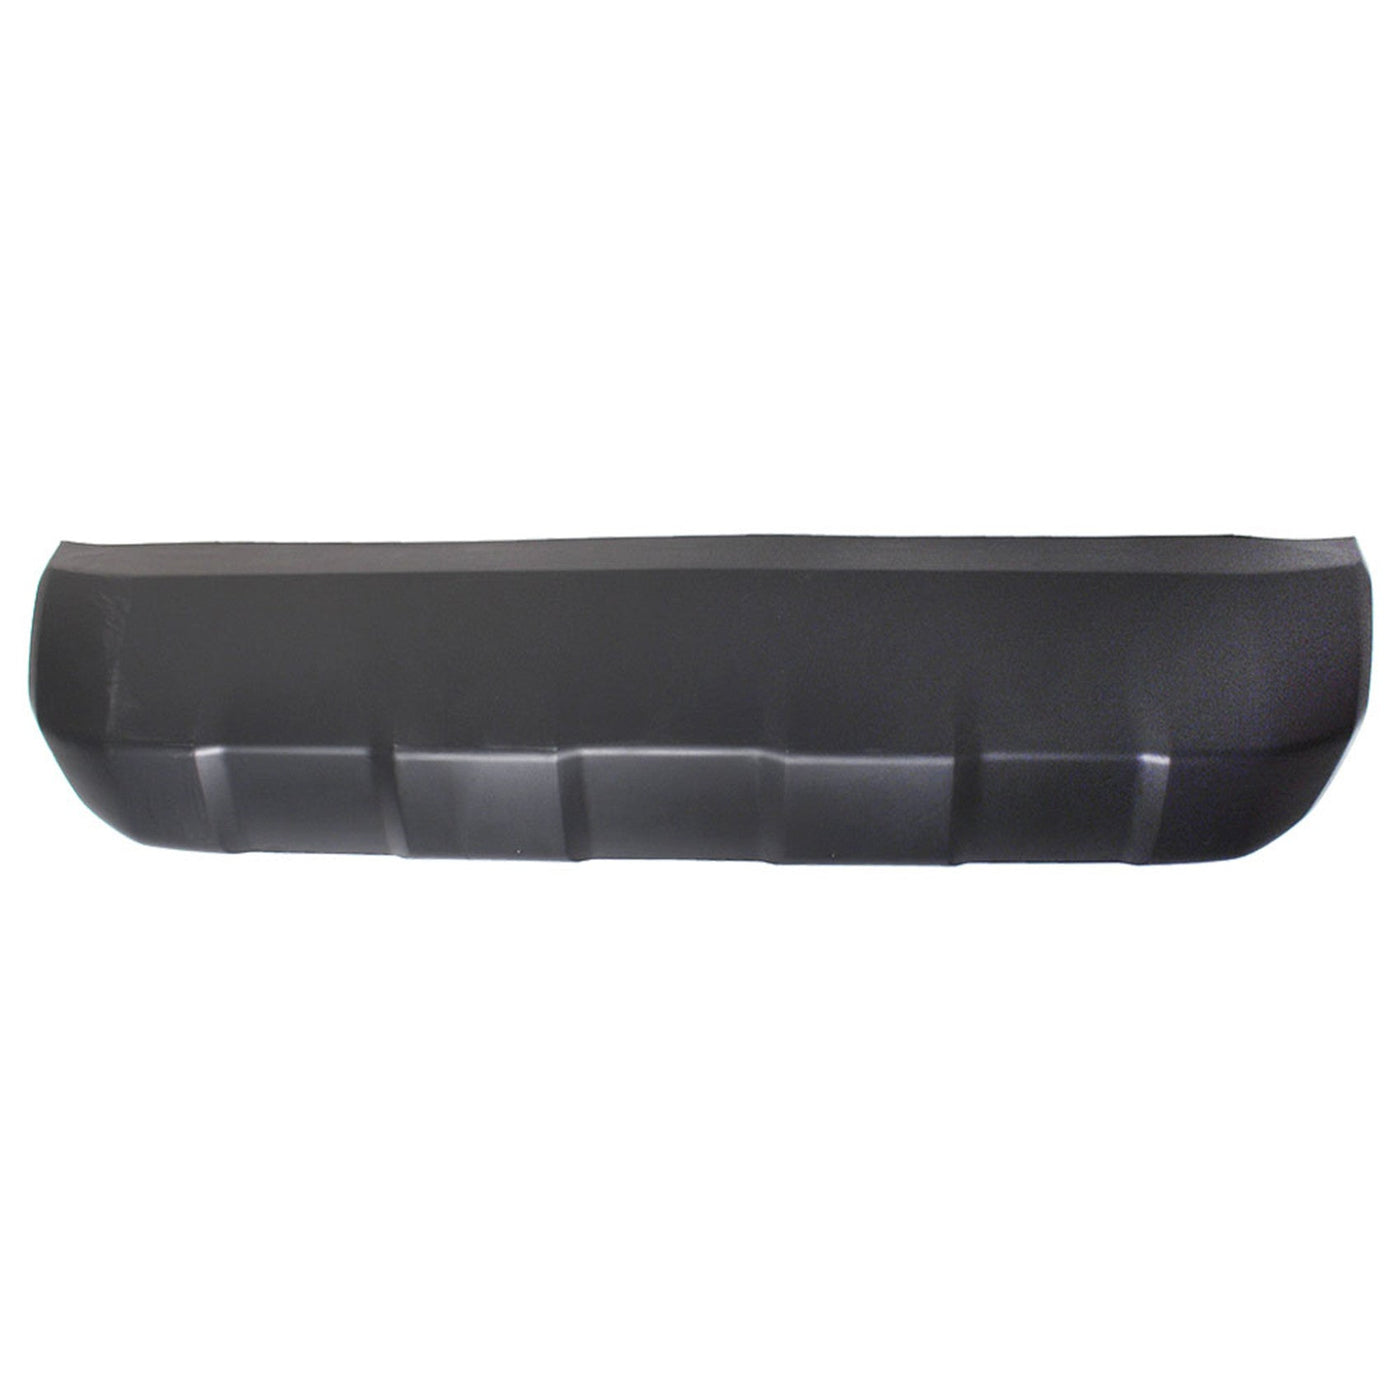 For 2016-2020 Toyota Tacoma Front Lower Bumper Valance Panel Skid Plate